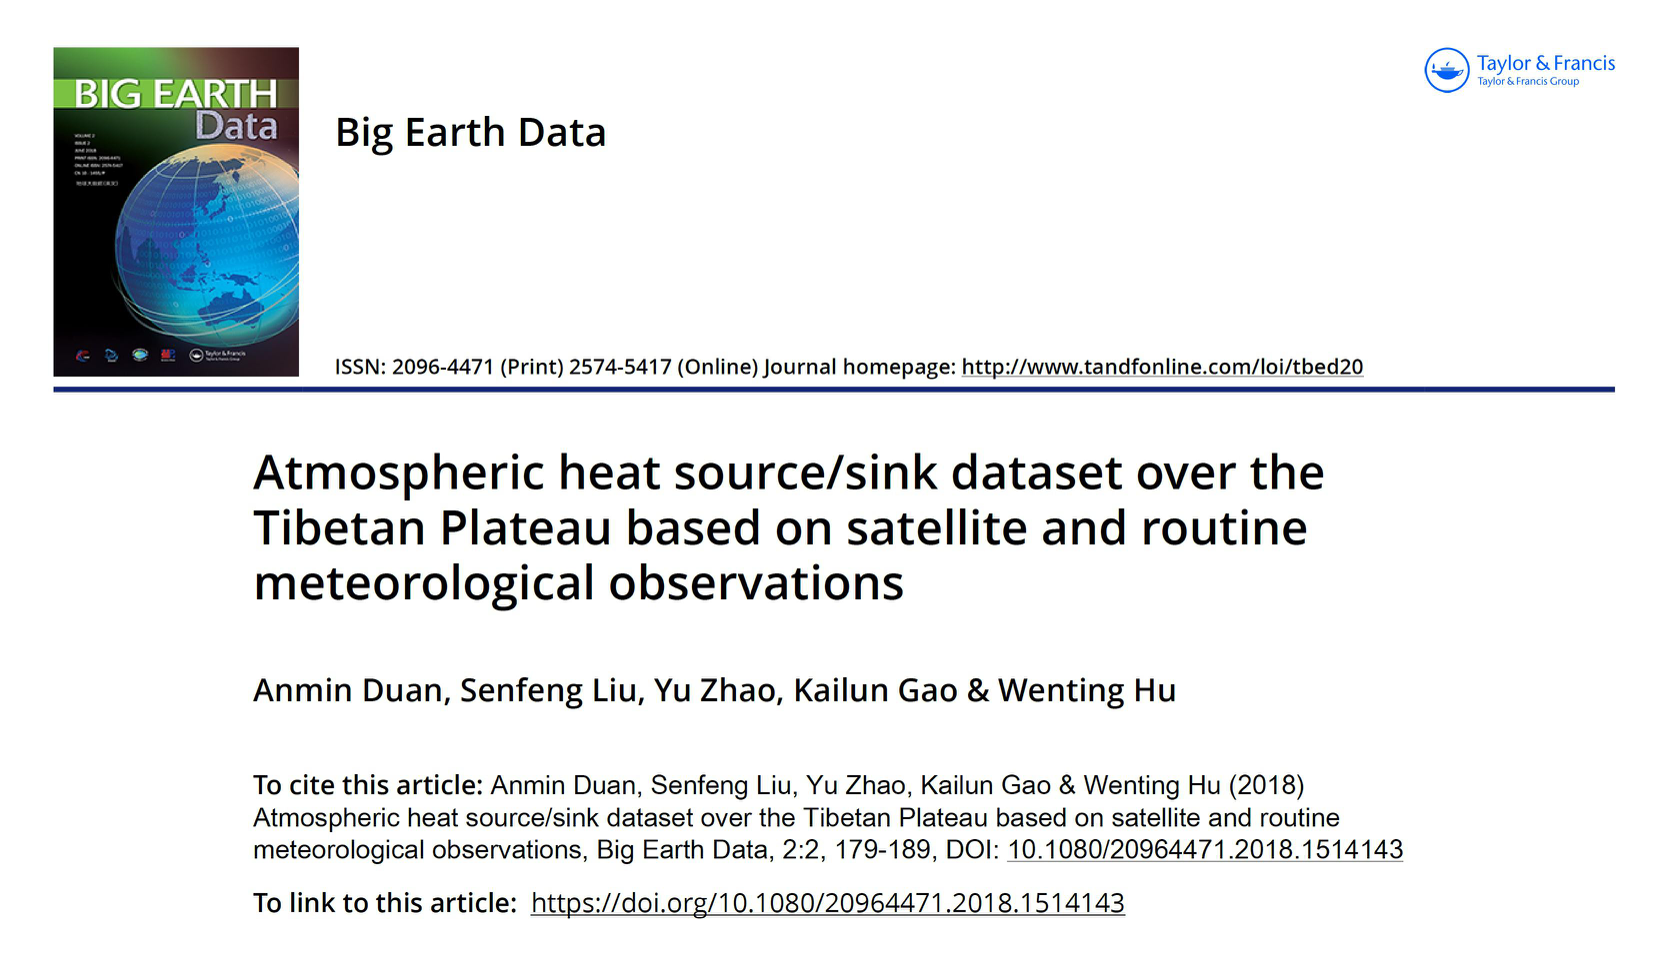 The atmospheric heat source dataset of Tibetan Plateau based on satellites and stations (1984-2015)